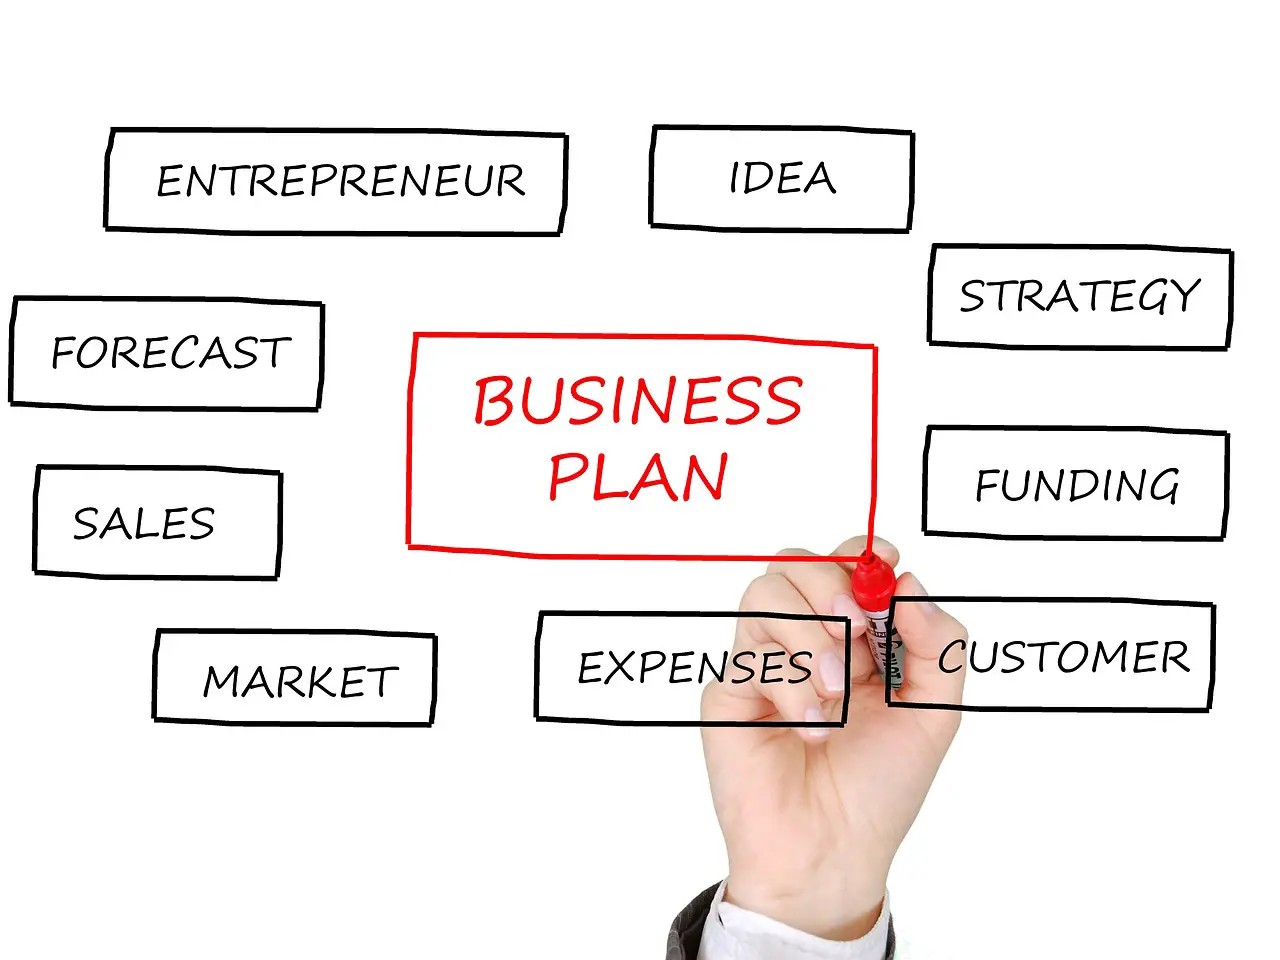 Using a Lean Canvas to create your business plan